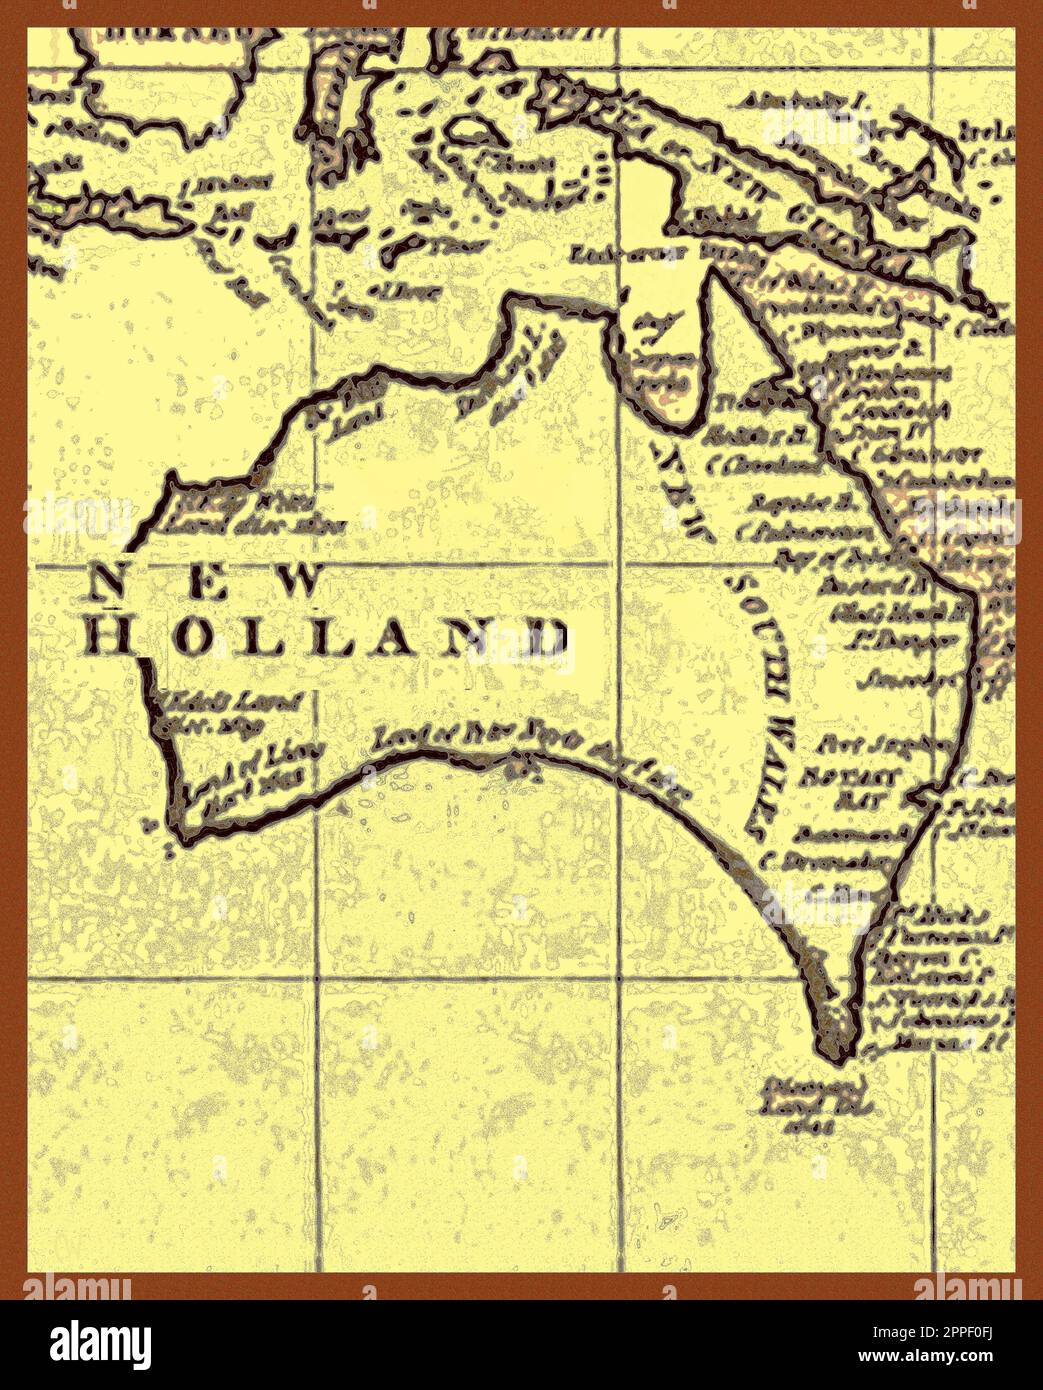 MAP - New Holland (Australia) 1787 as charted by Captain James Cook. The long held belief that Captain Cook’s son James, died without issue has in 2024 been disputed in a new book. “The Untold Story of Captain James Cook R N”.  (Pen & Sword books – ISBN 978-1399056960 ). Verifiable history changing  evidence is based on the discovery of a newly discovered 18th century government document discovered in the  British National Archives. Stock Photo